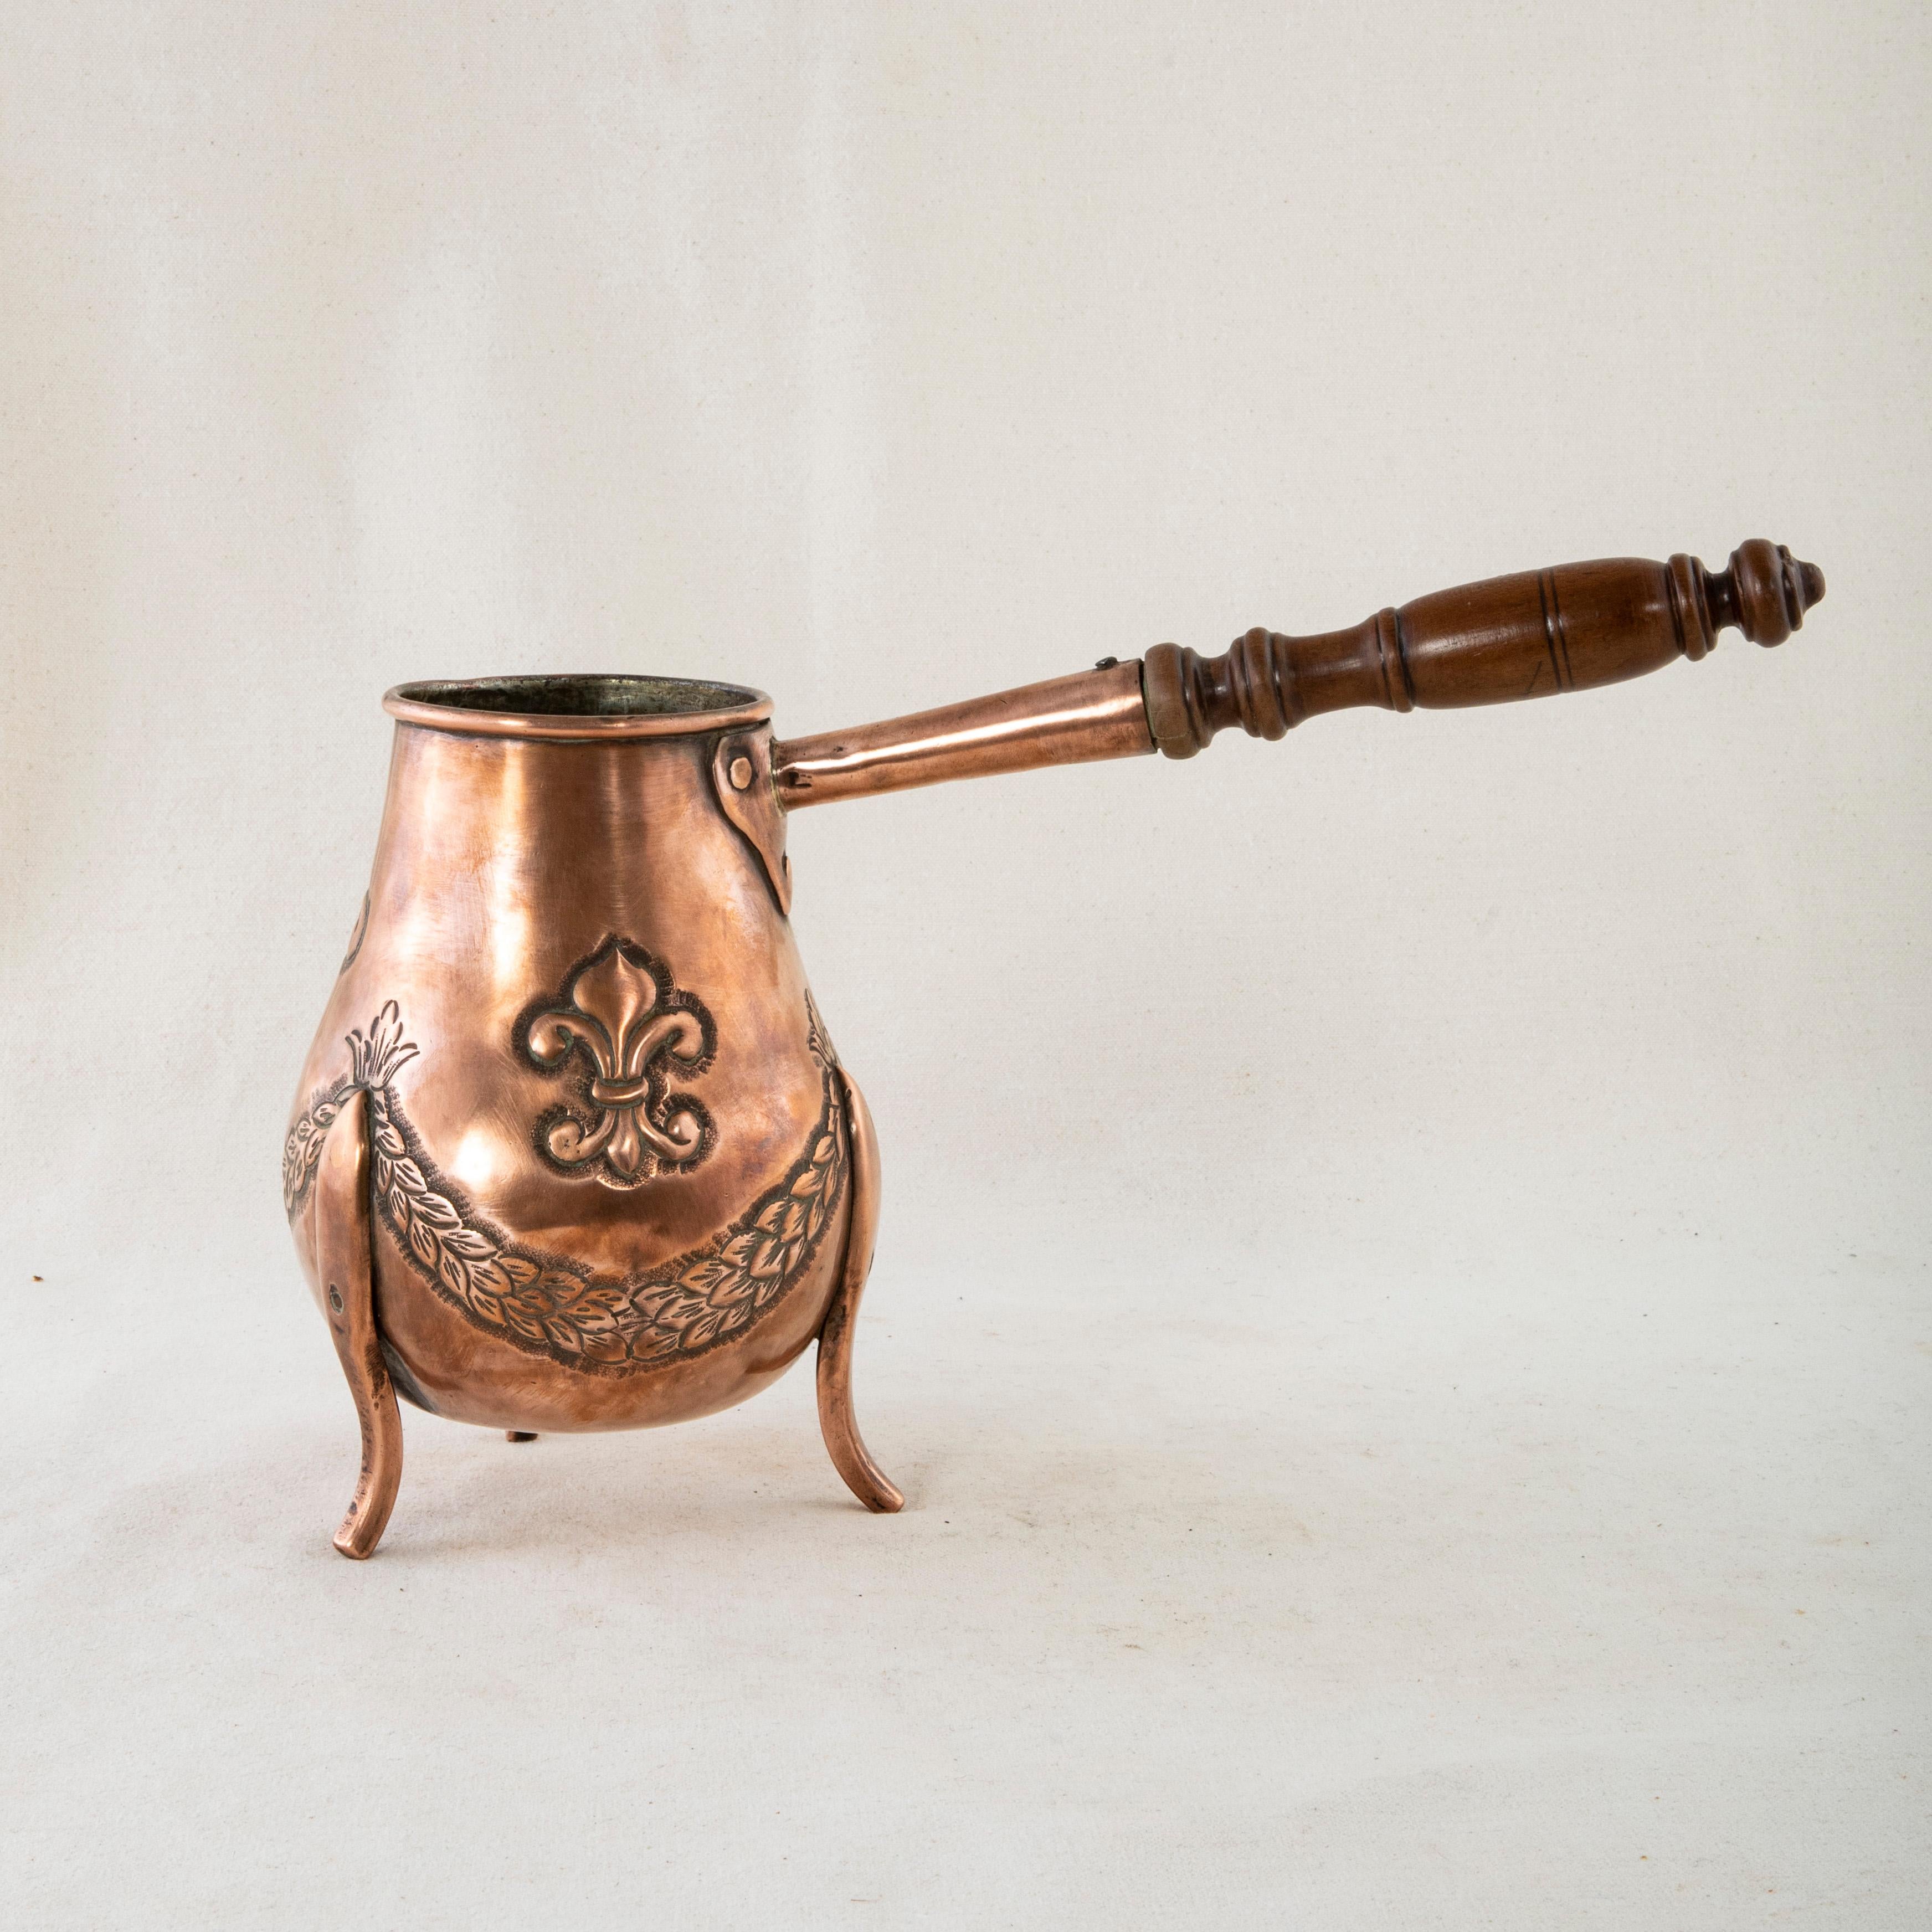 Originally used to make and serve hot chocolate in a French chateau, this early nineteenth century French copper chocolate pot features repousse fleurs de lys and garlands of laurels. A copper riveted turned wooden handle is affixed to one side. The